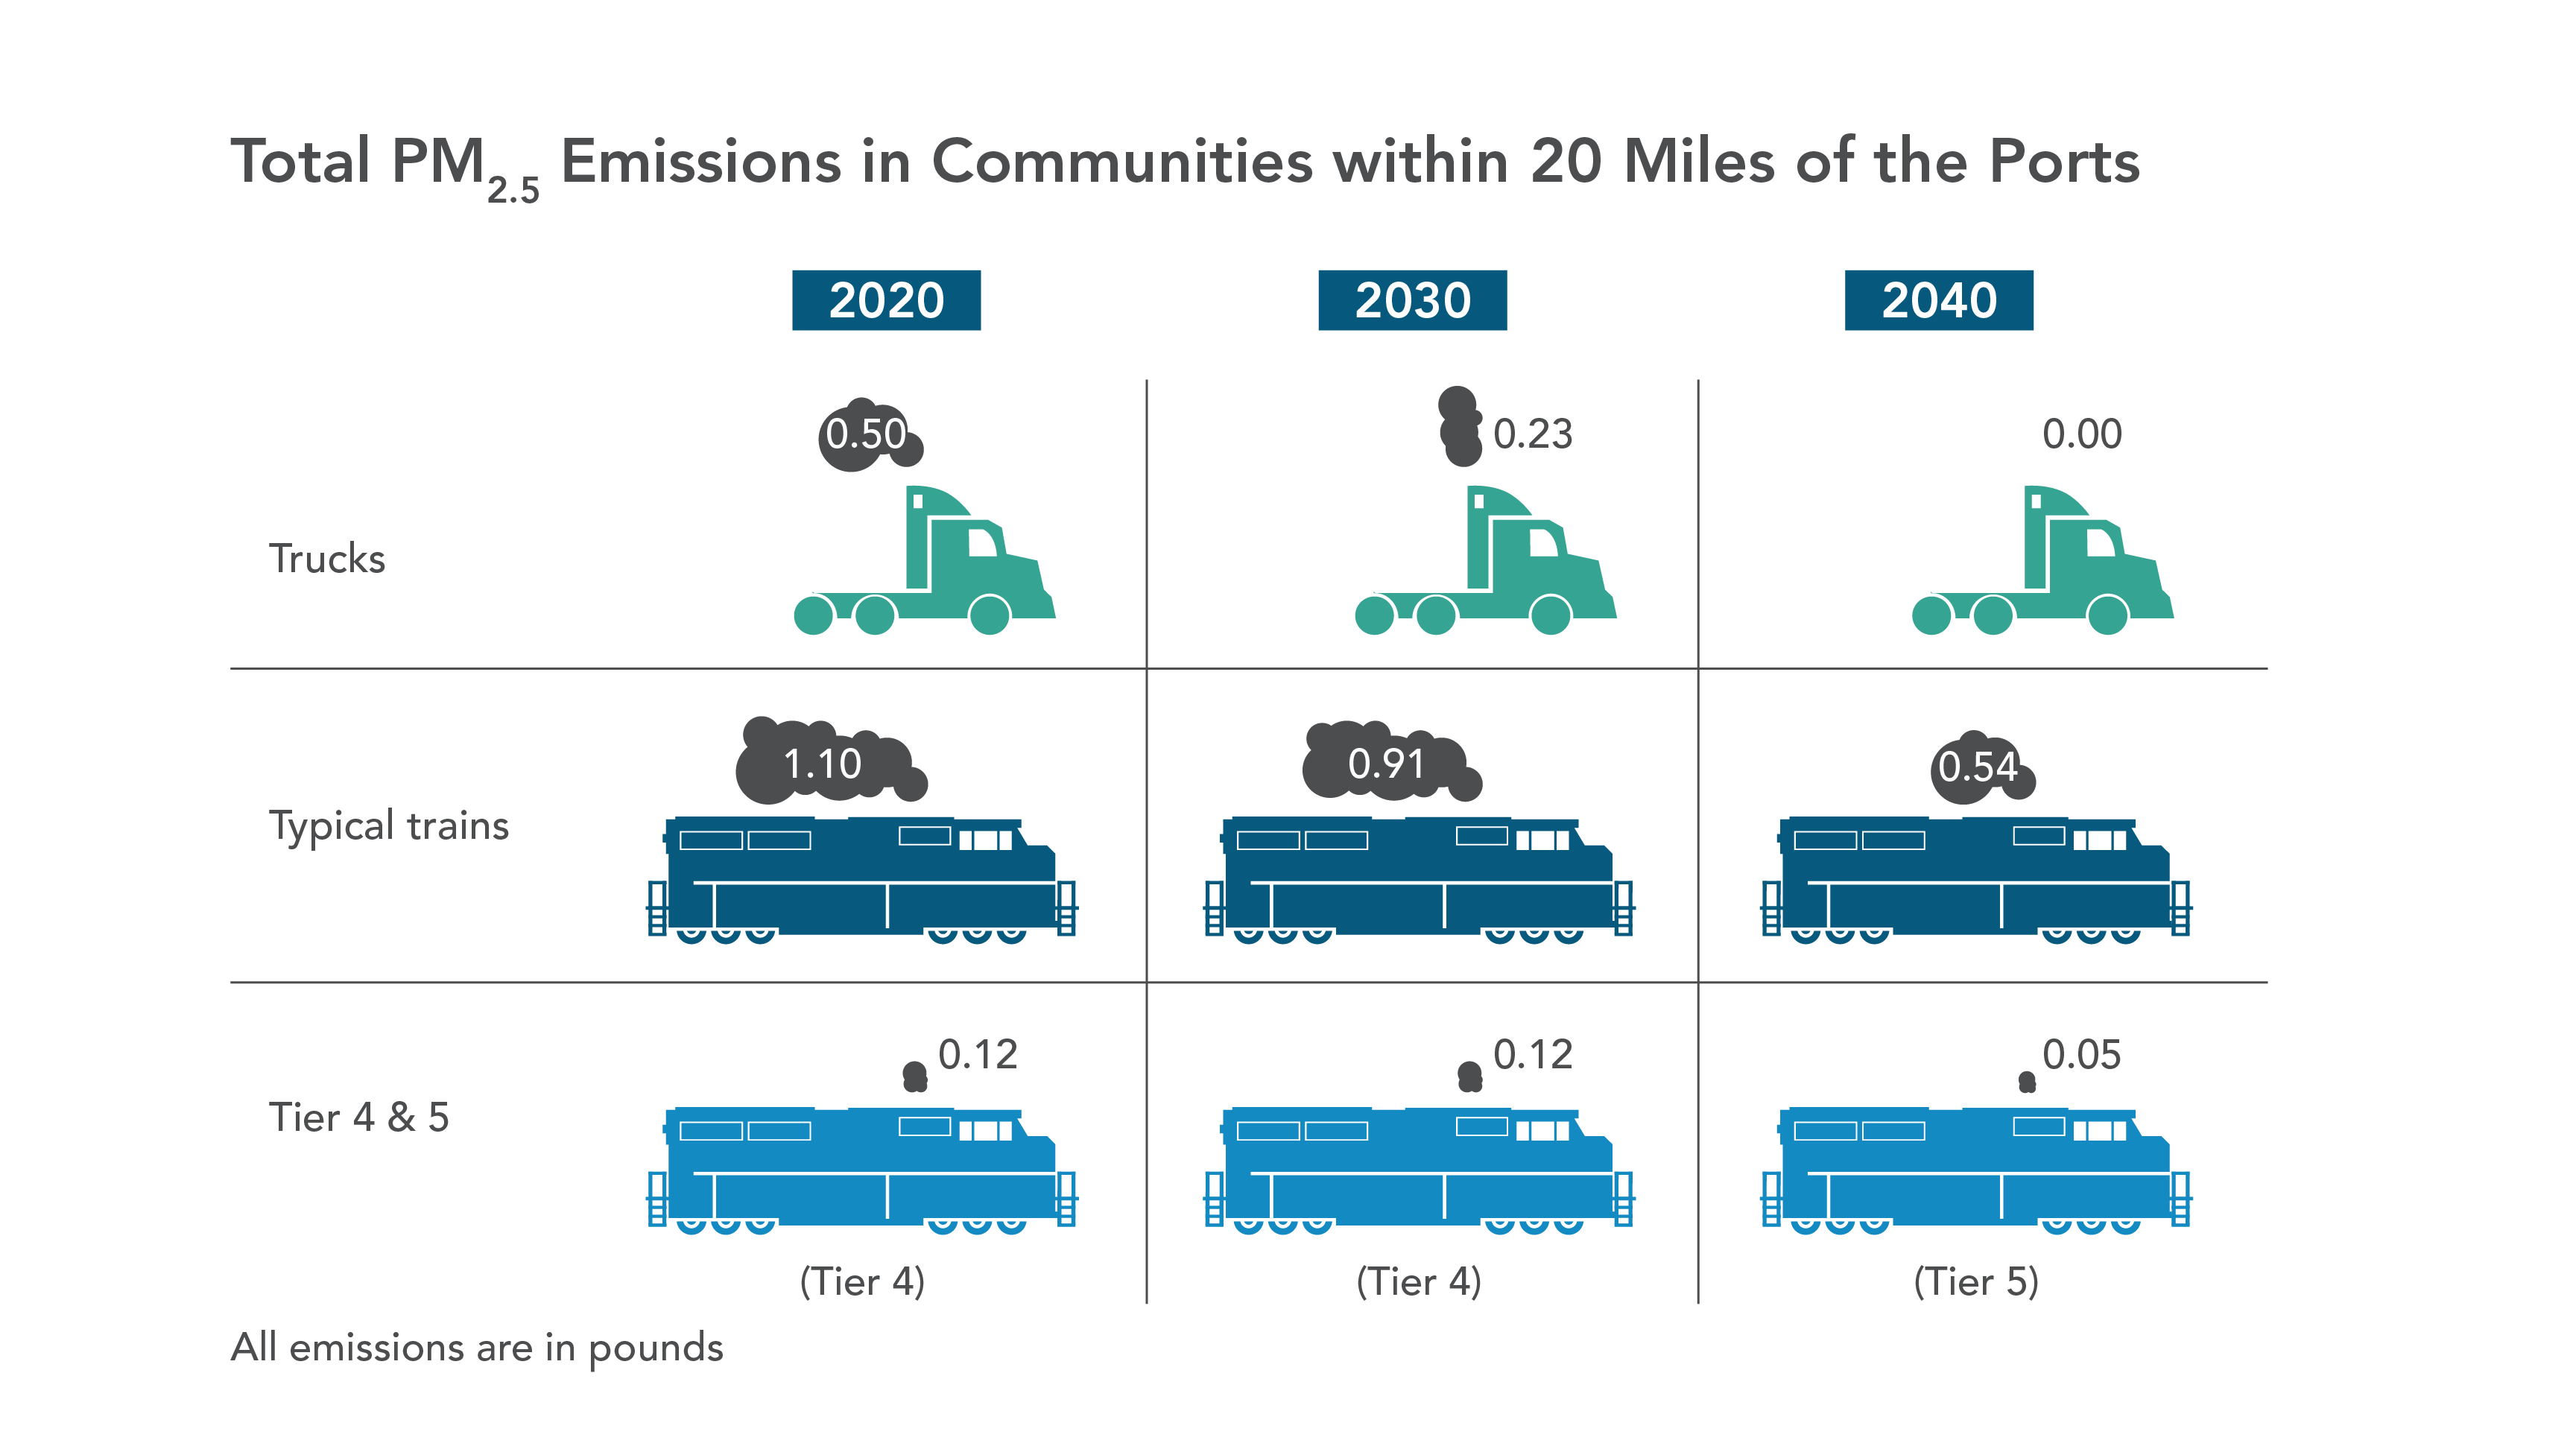 Comparison of truck and train PM 2.5 emissions in communities within 20 miles of the ports.  Includes tier 4 and 5 locomotives, which are cleaner than trucks in 2020 and 2030.